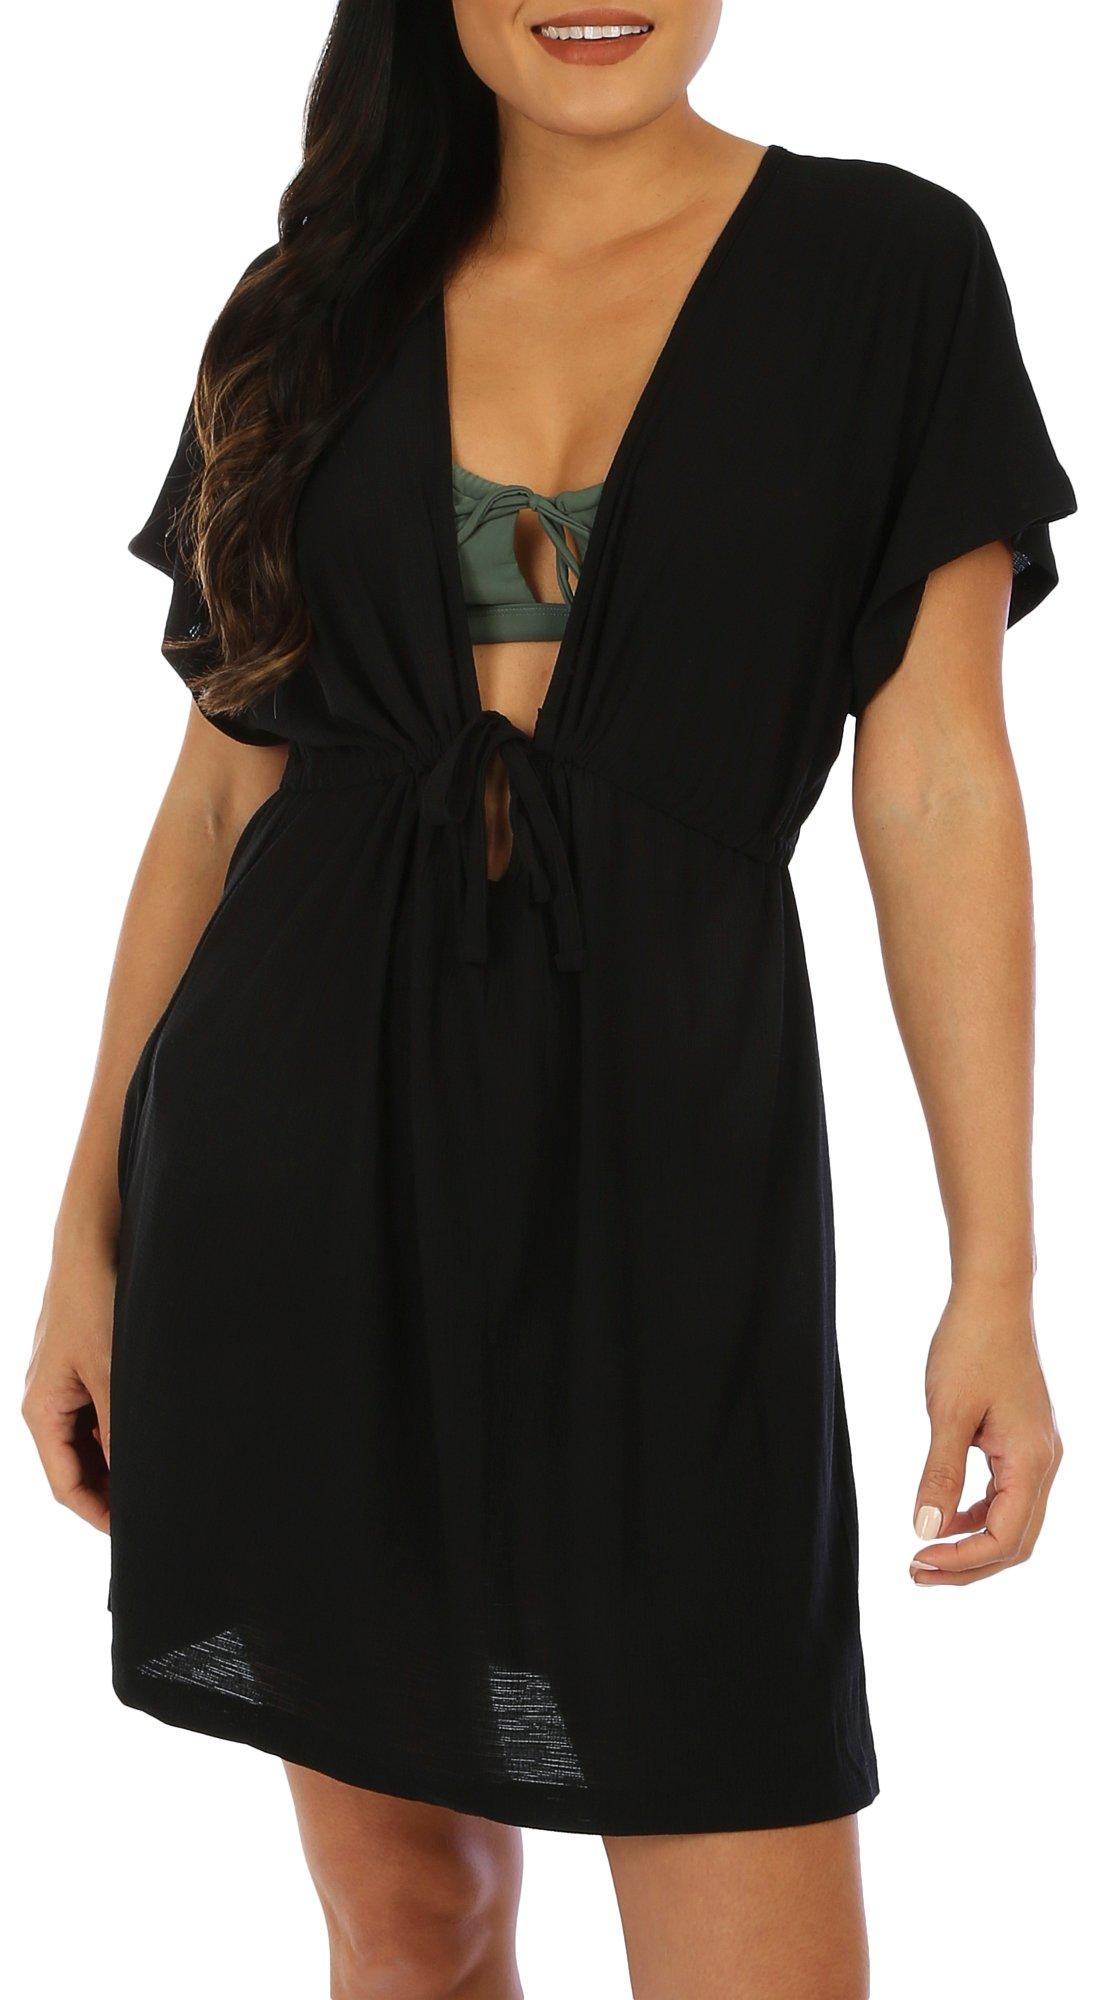 Womens Solid Short Sleeve Coverup